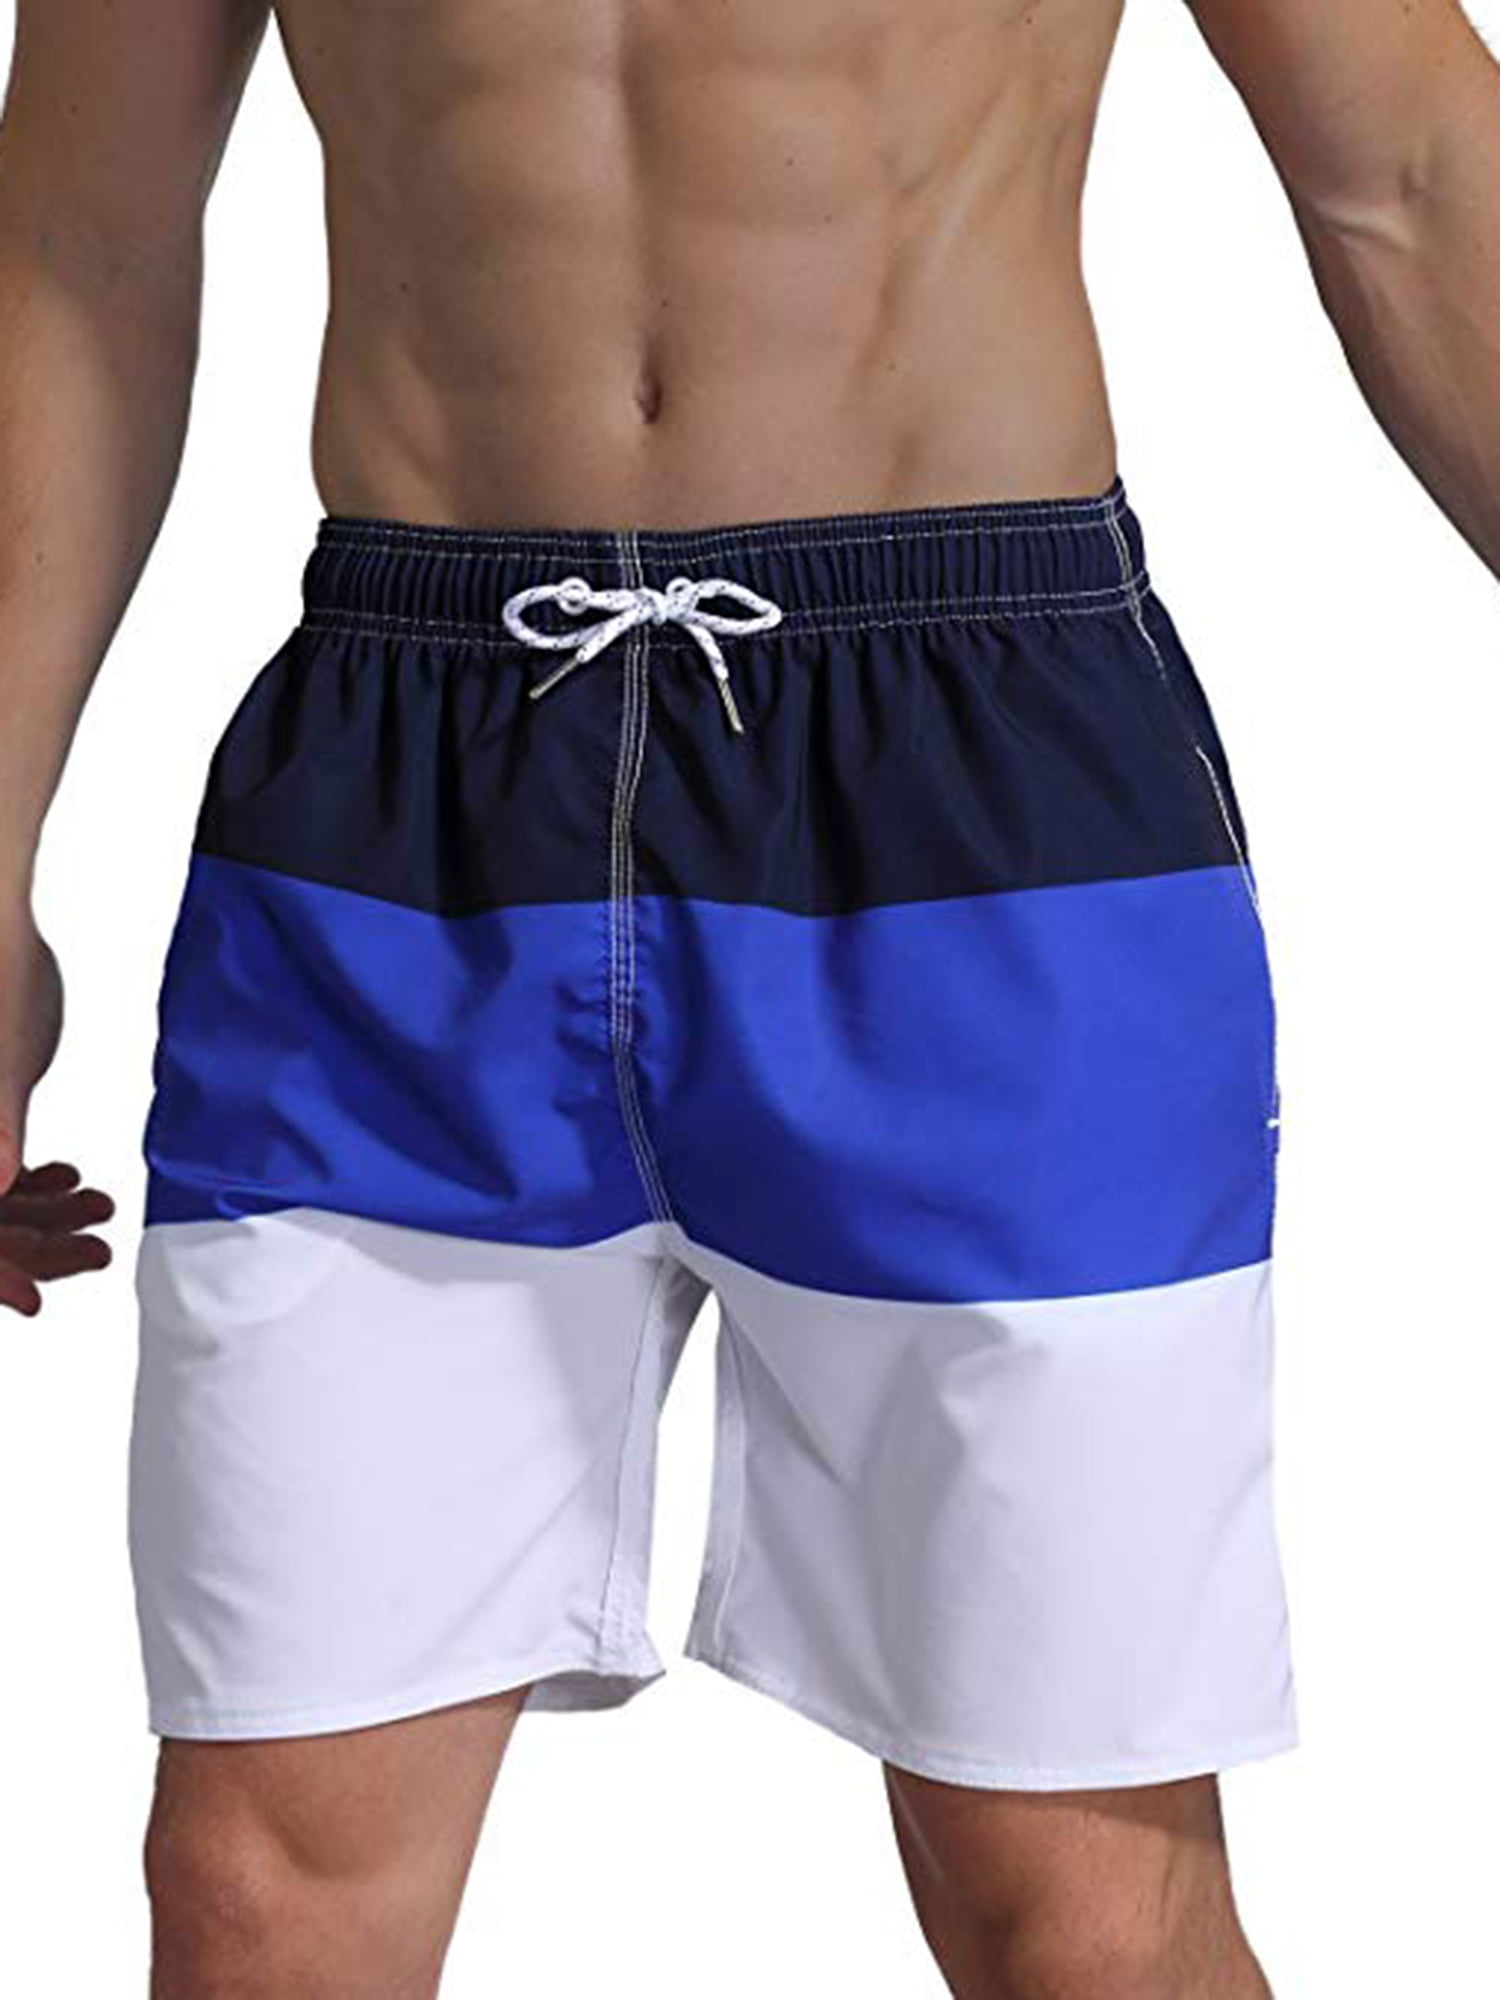 Youloveit Mens Swim Trunks Board Bathing Suit Beach Shorts Holiday ...